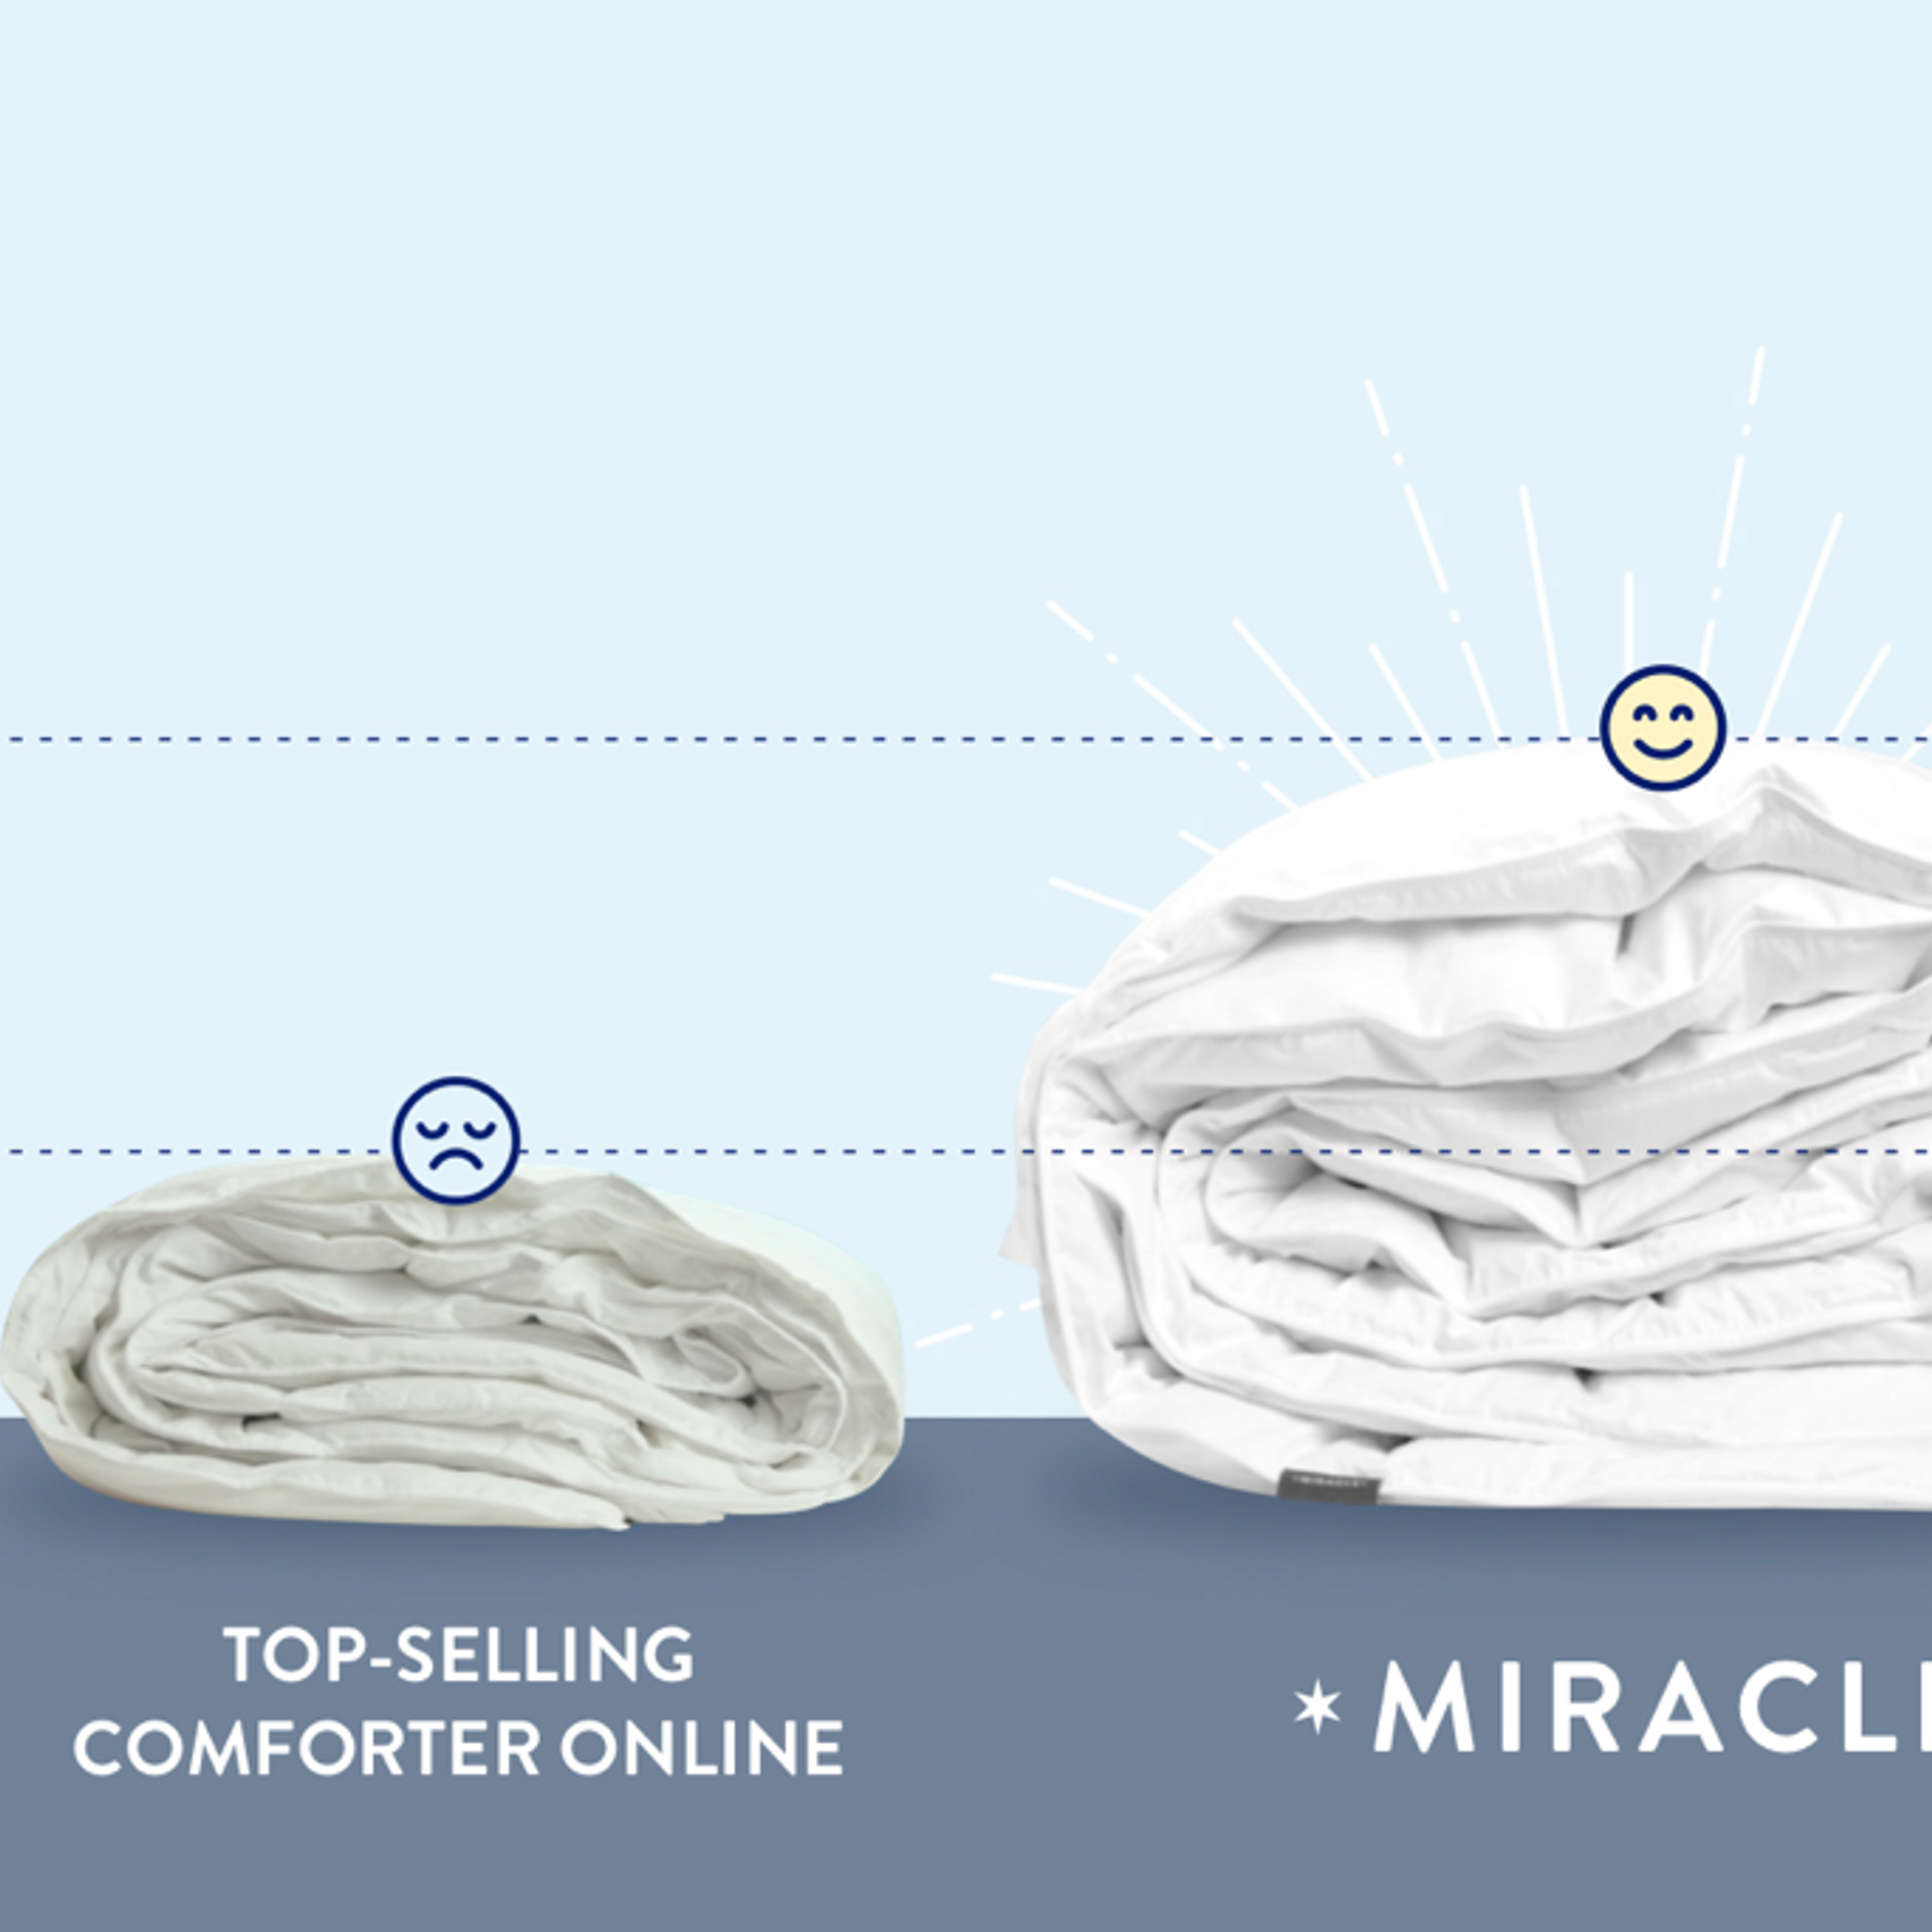 Miracle Made Comforter